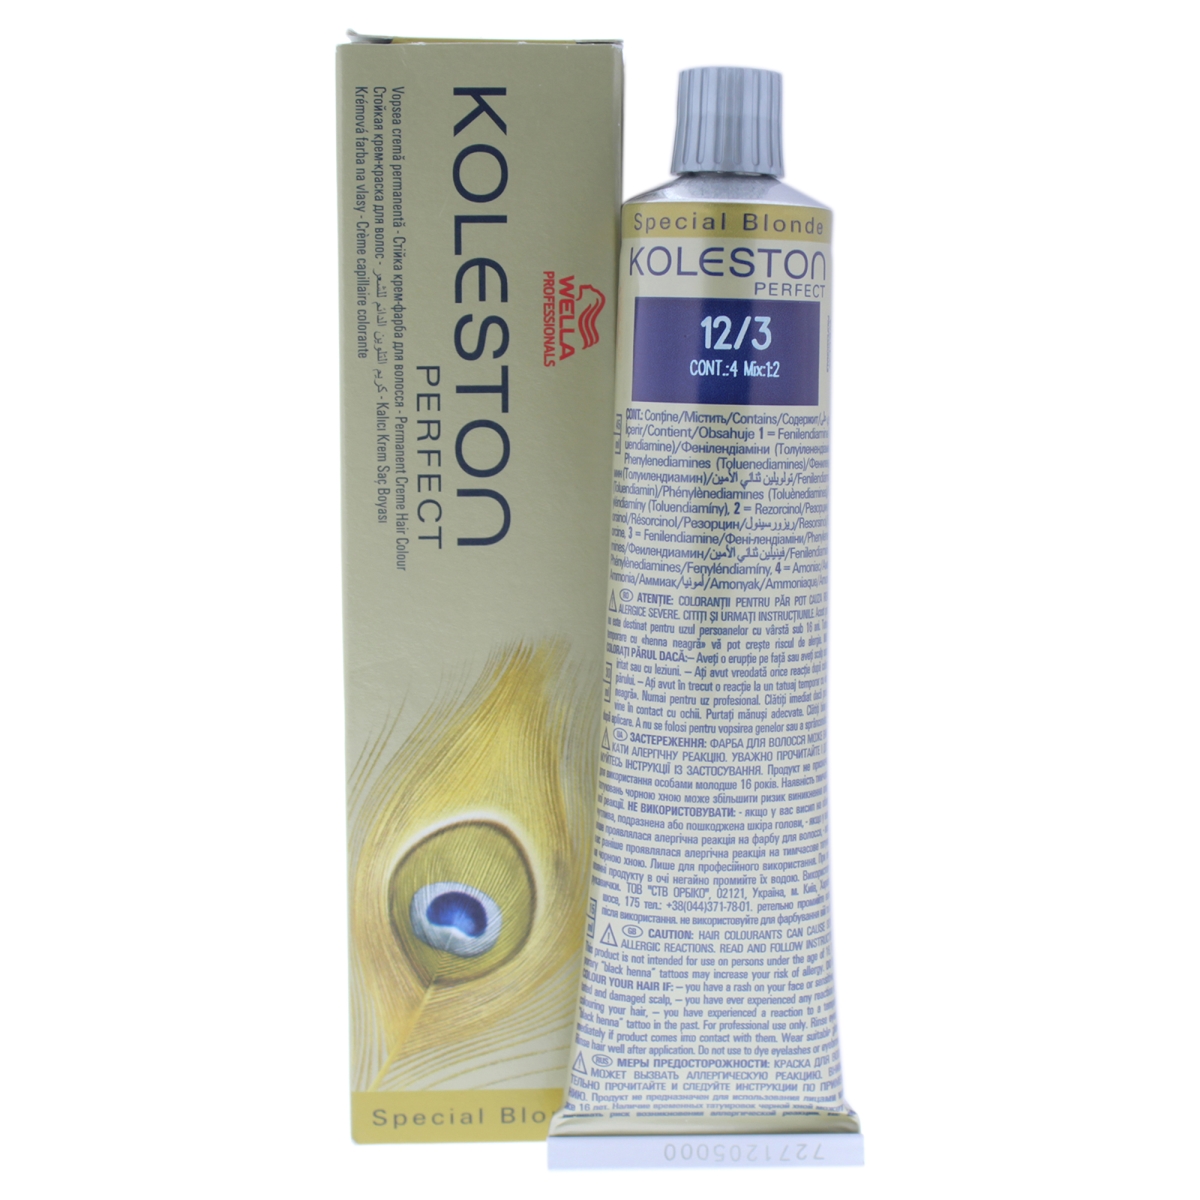 I0084333 Koleston Perfect Permanent Creme Hair Color For Unisex - 12-3 Special Gold Blonde Hair - 2 Oz